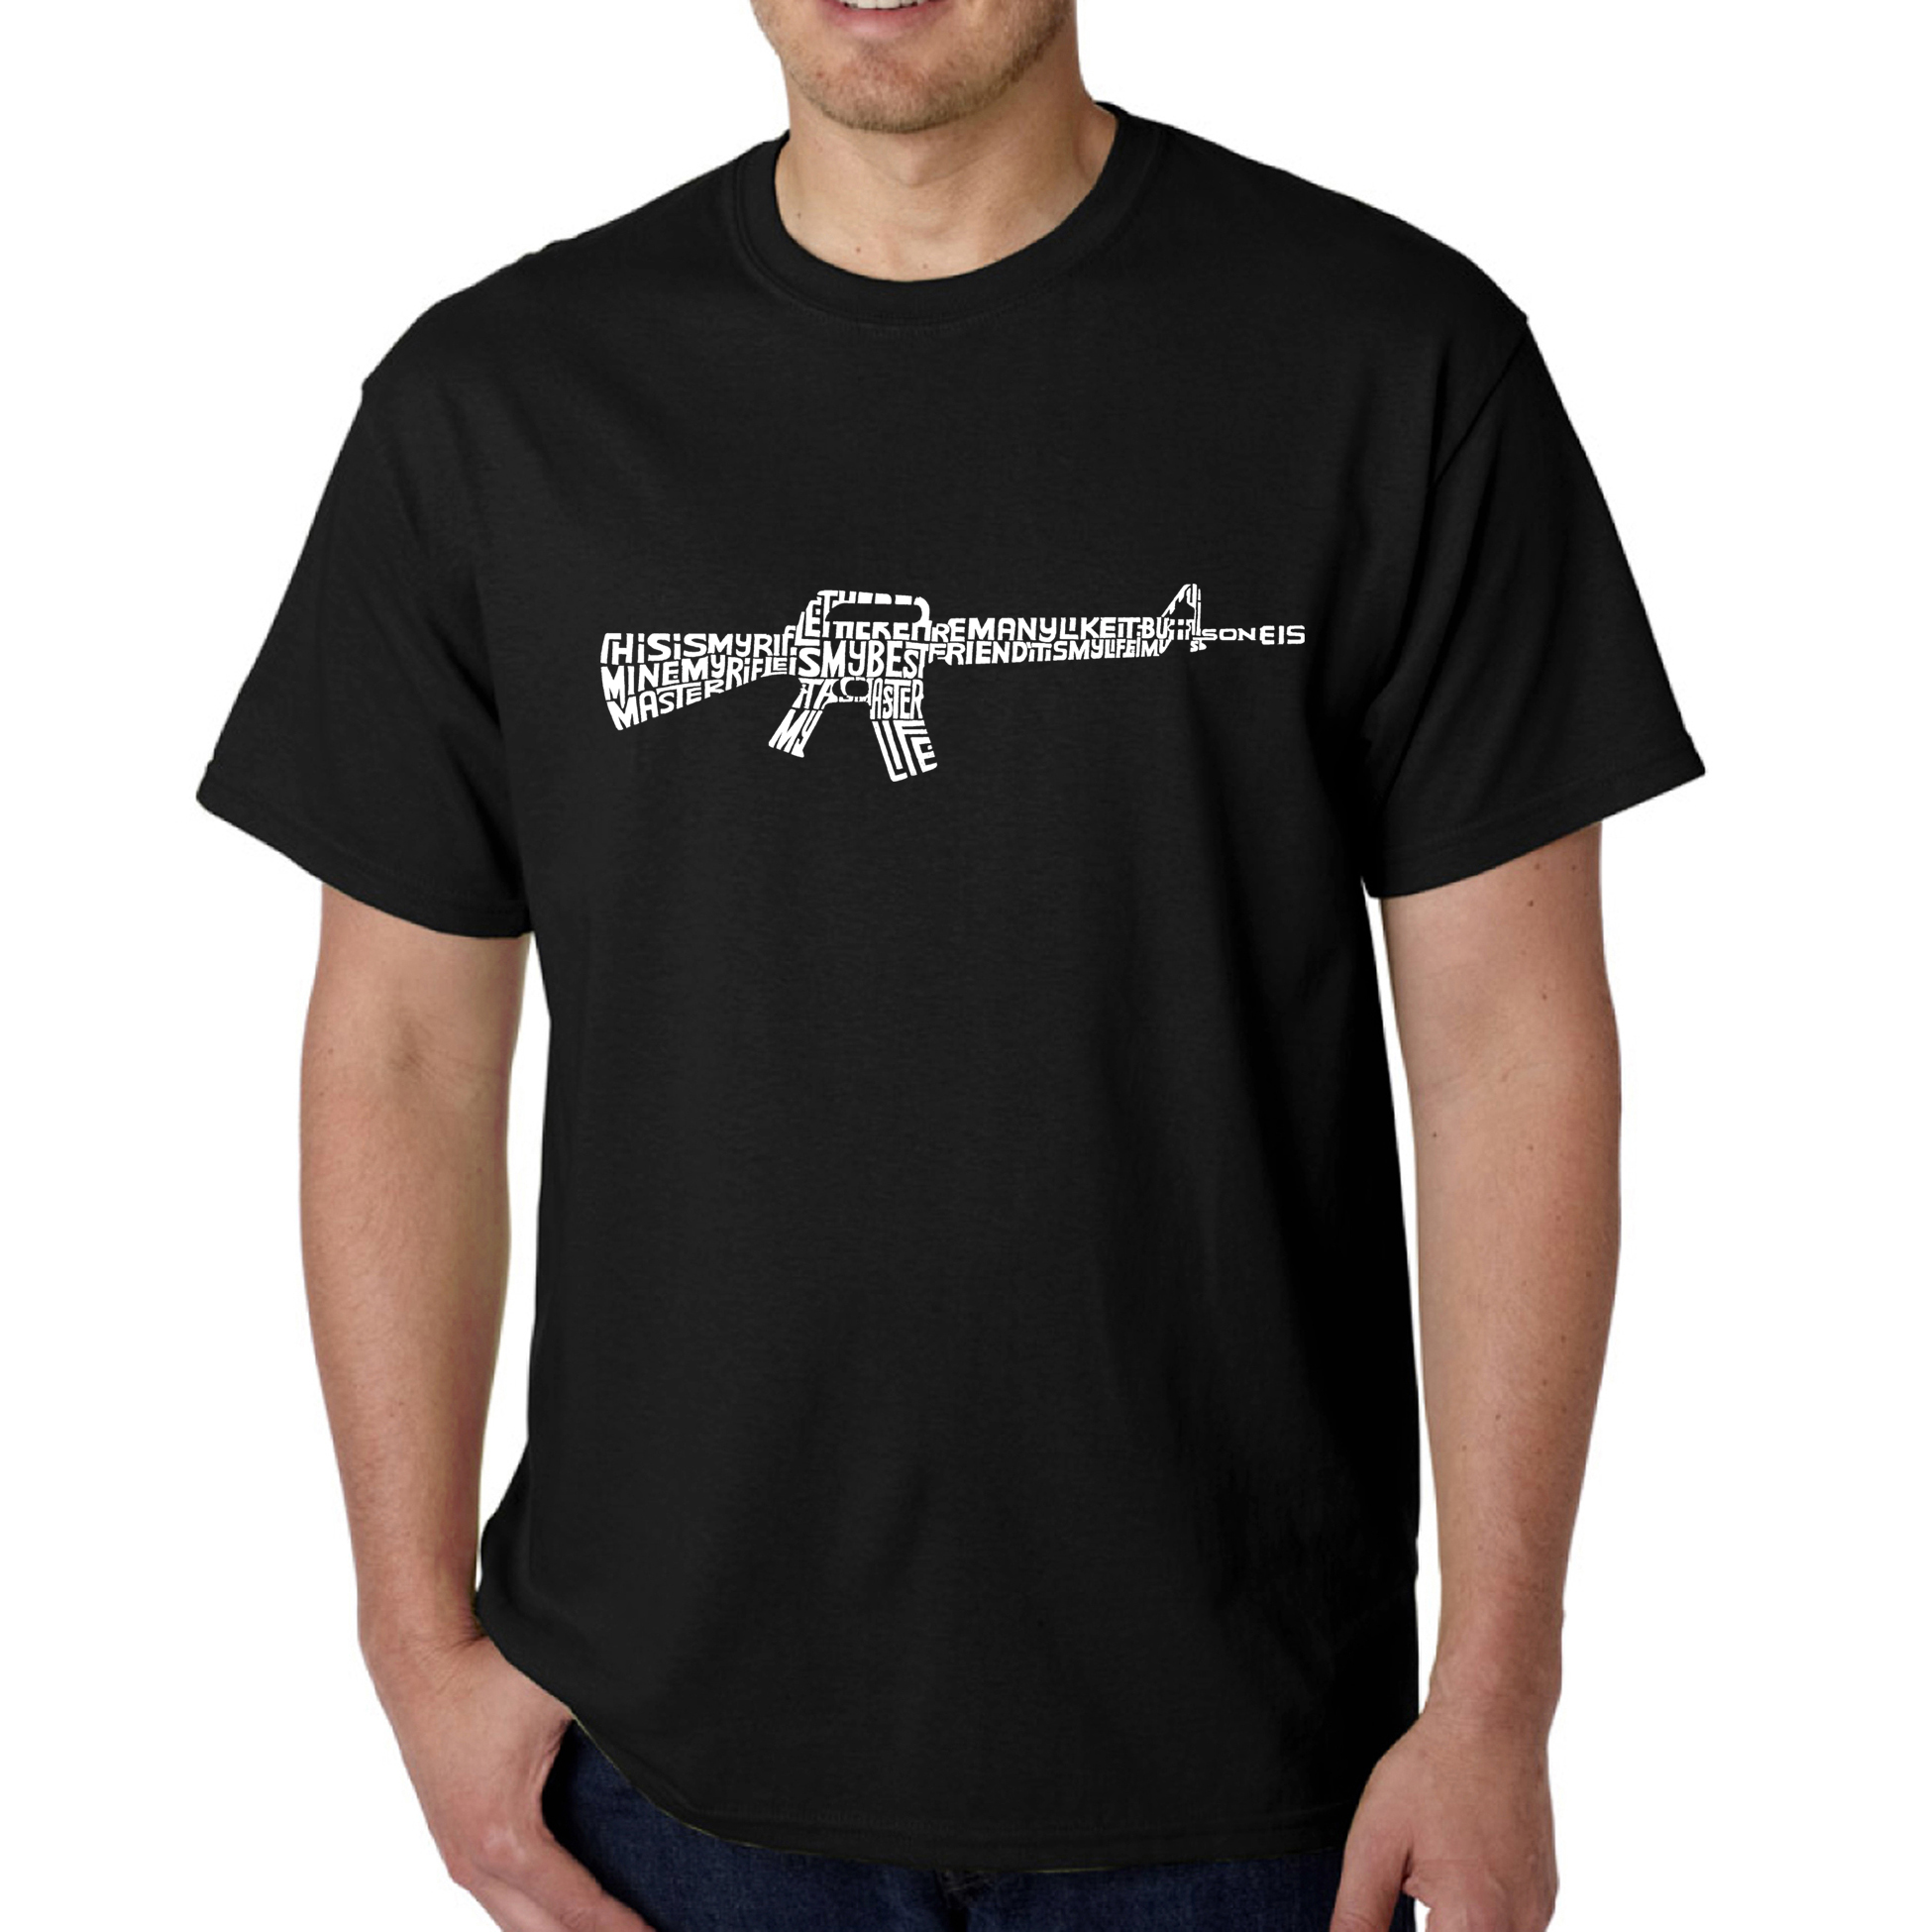 Los Angeles Pop Art Men's Word Art T-Shirt - The First Few Lines of The Riflemans Creed